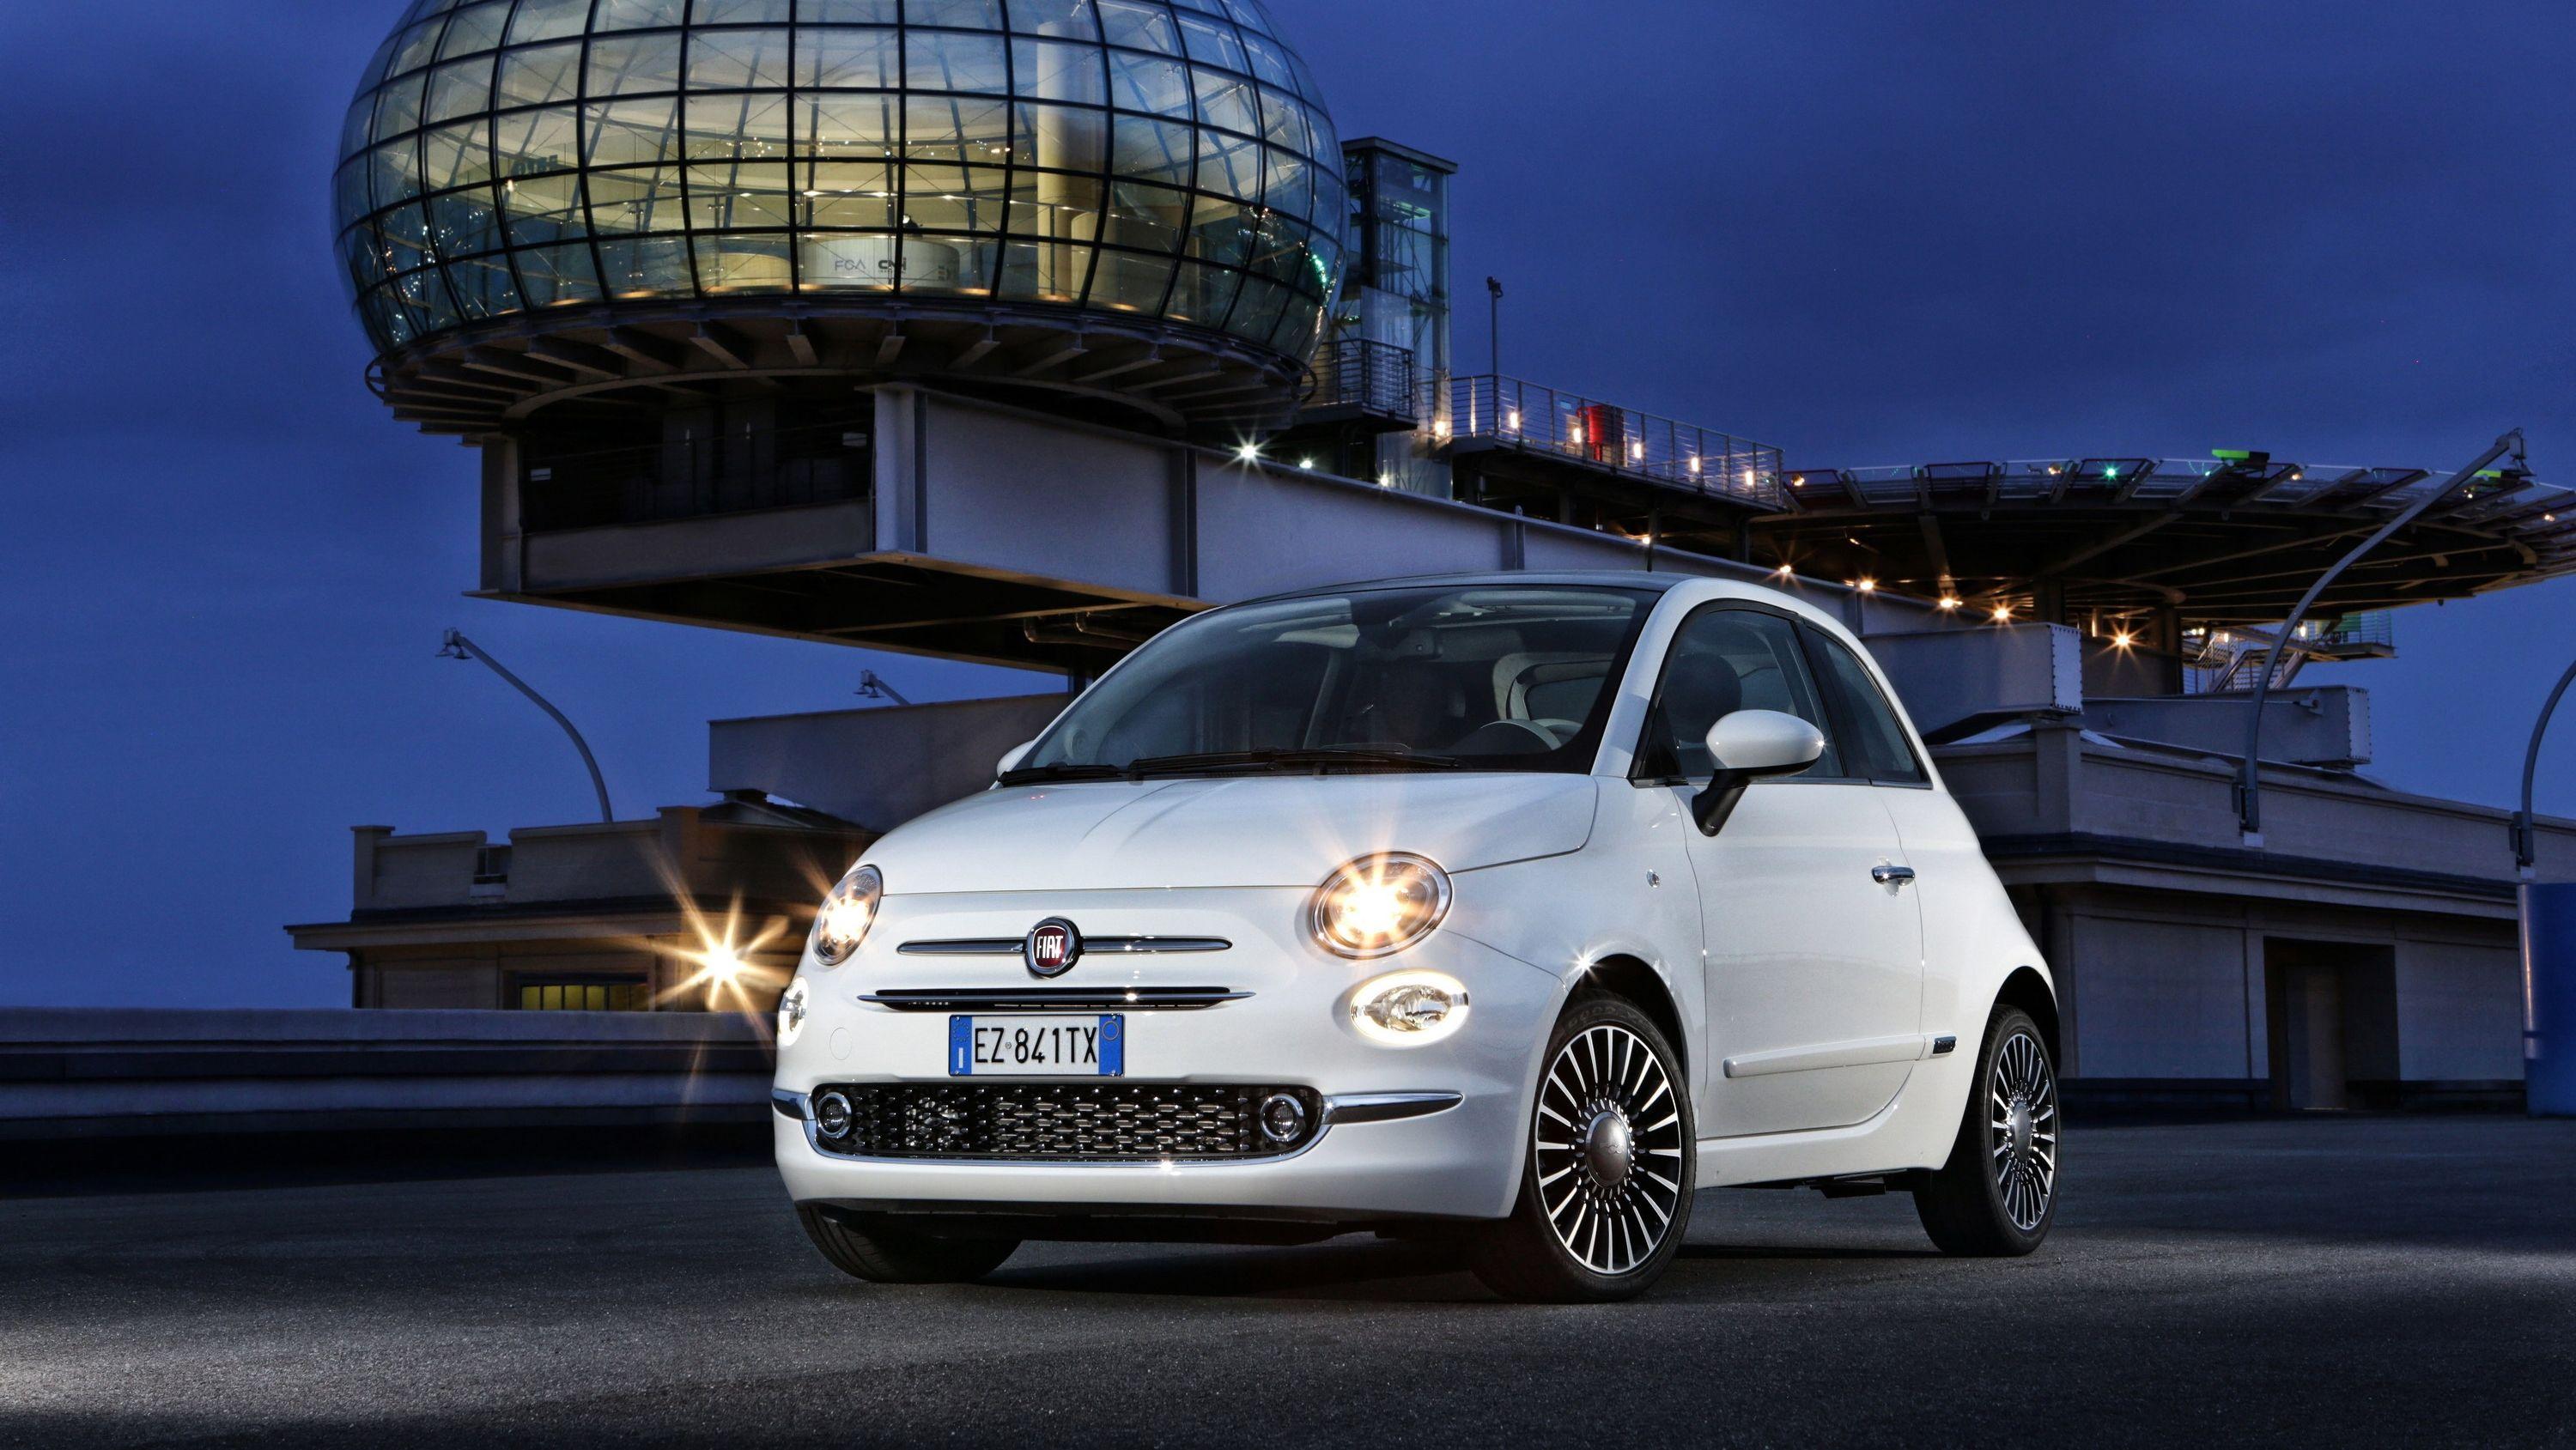 Wallpaper Of The Day: 2106 Fiat 500